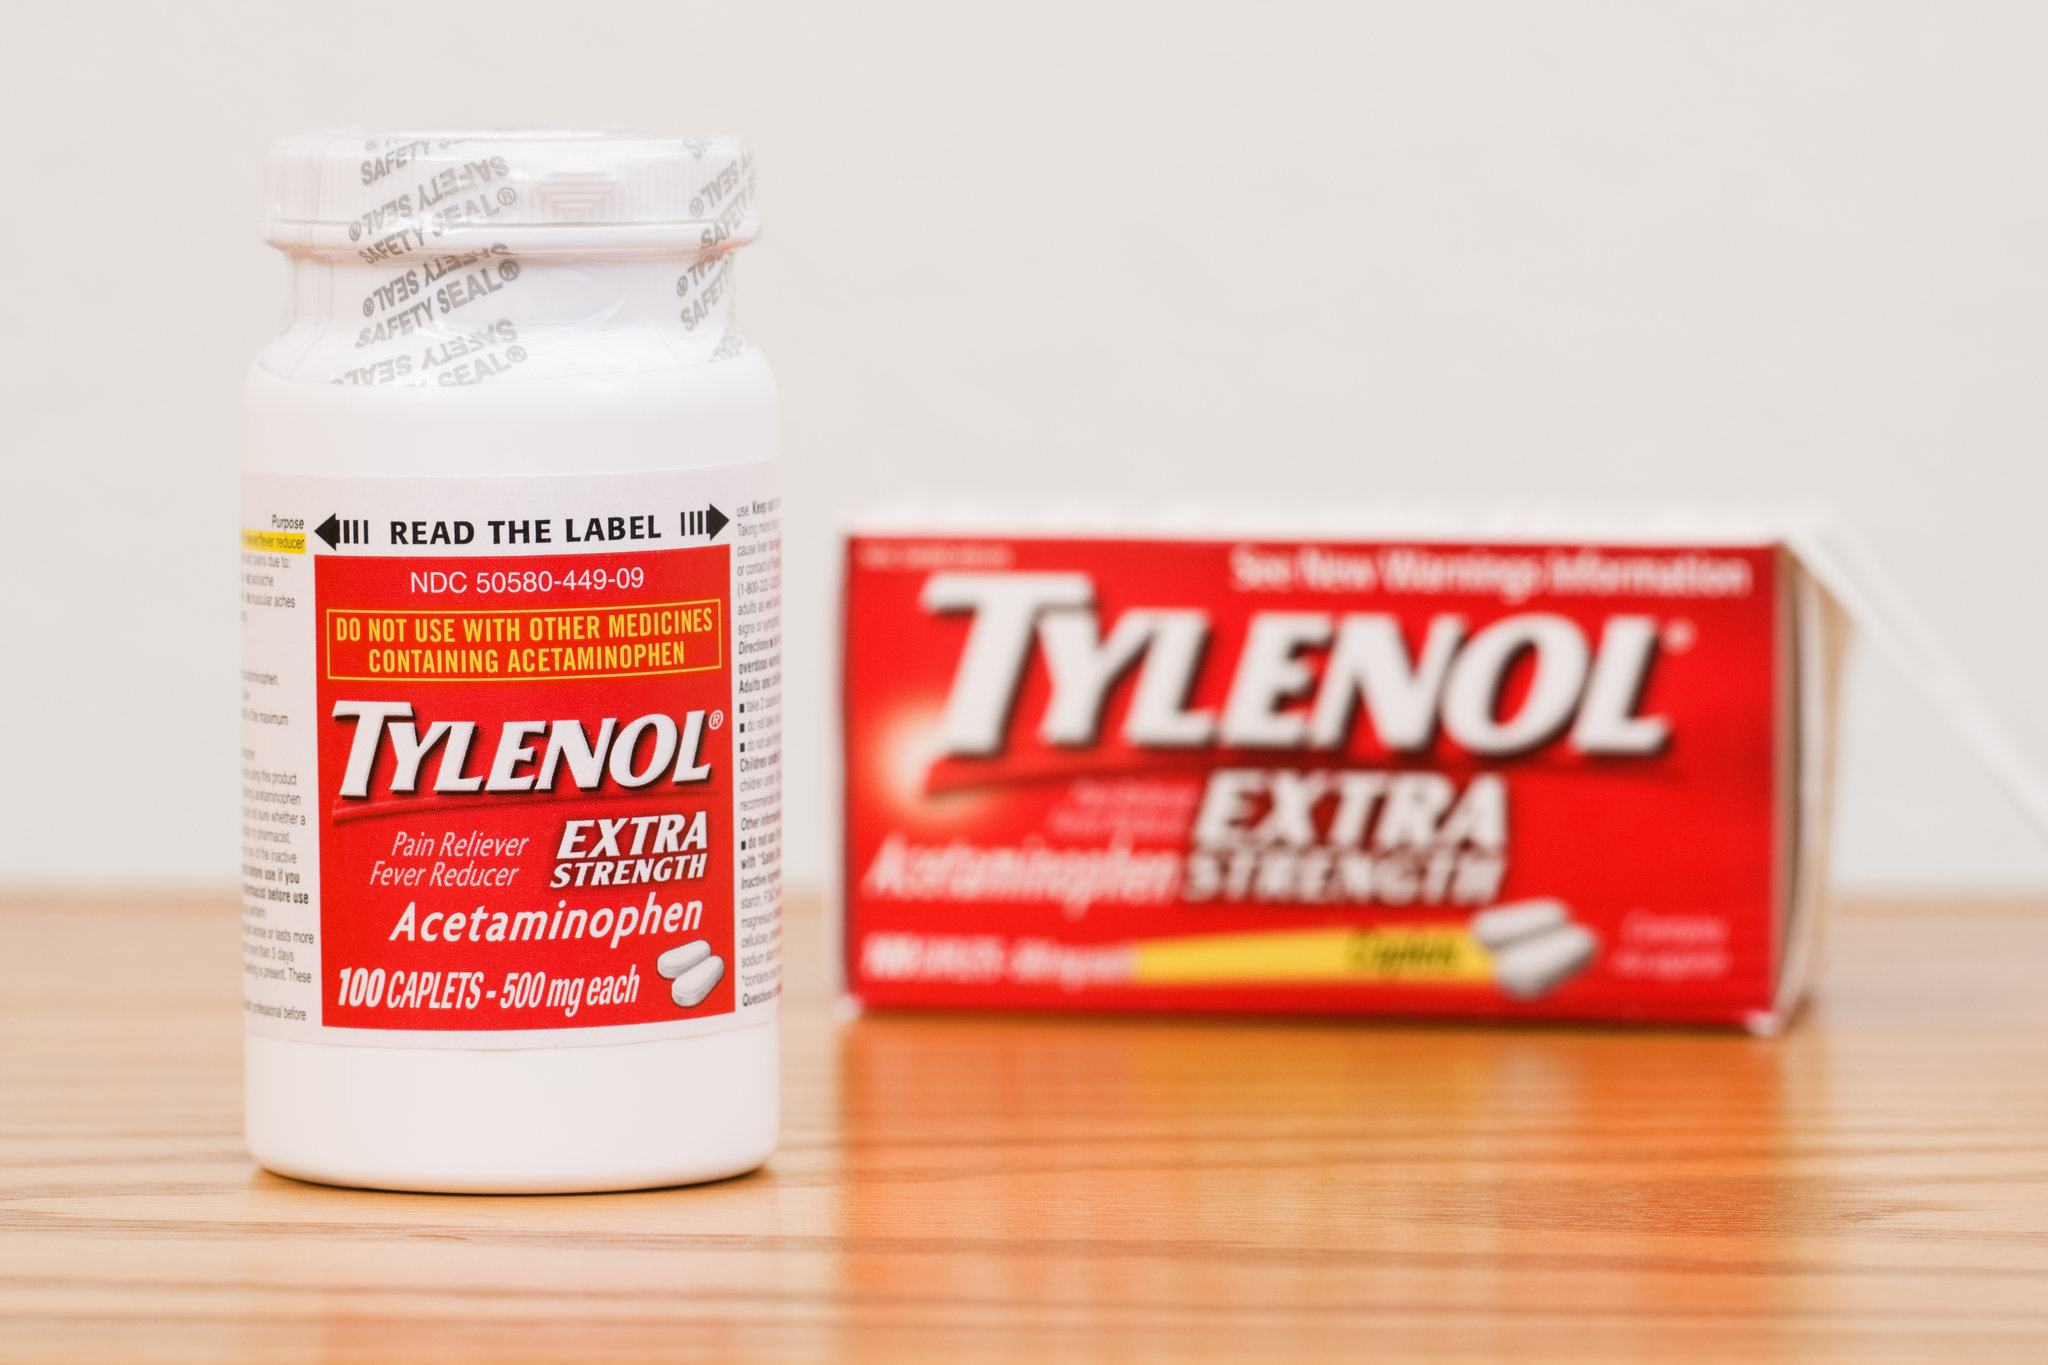 How Long After Drinking Can I Take Tylenol